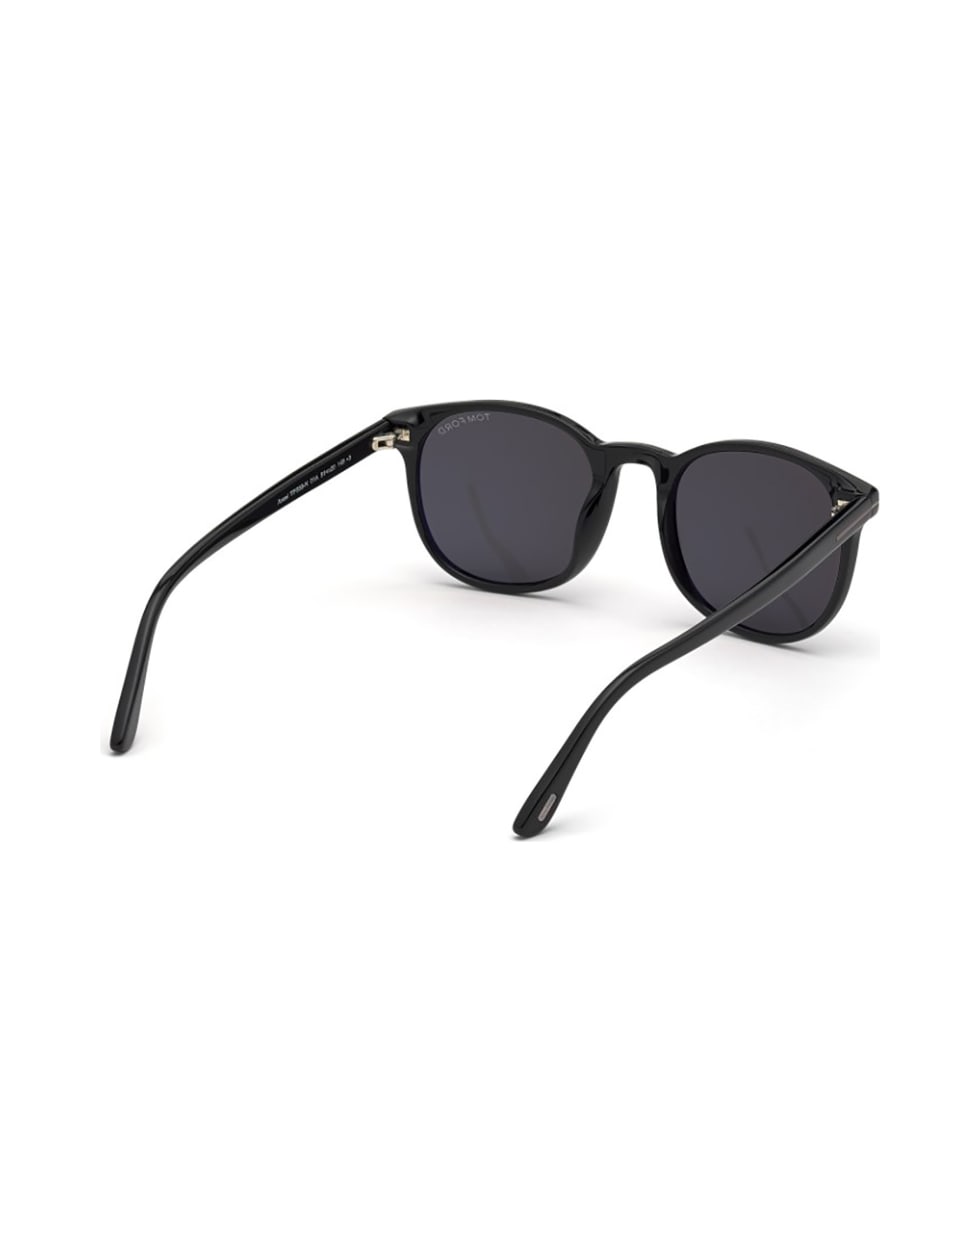 Best price on the market at italist | Tom Ford Eyewear 1aeo48j0a